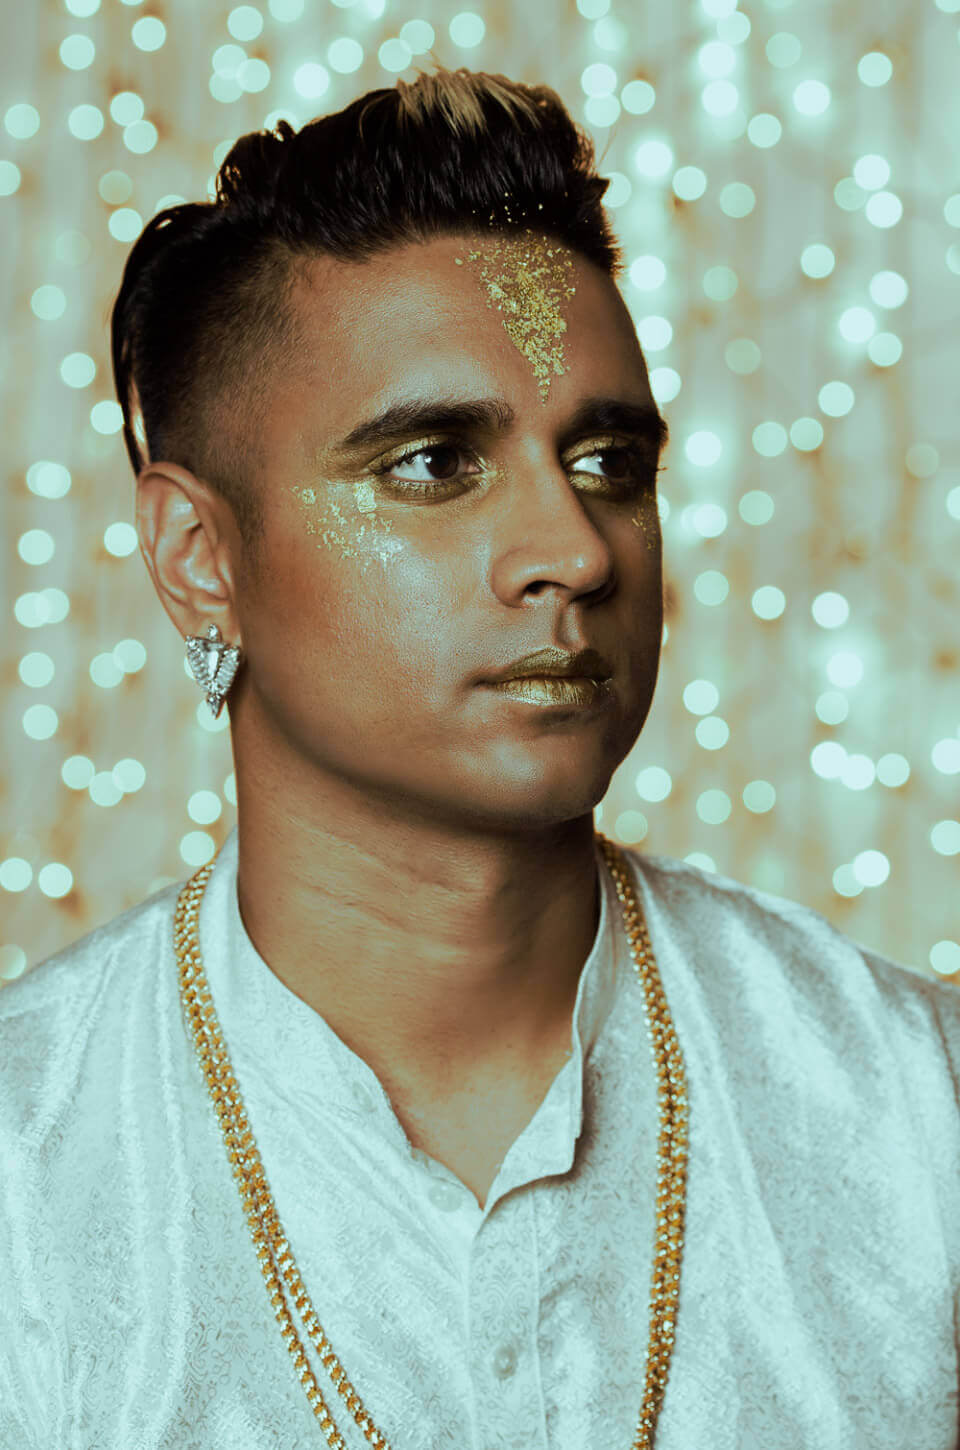 A recent head-and-shoulders photo of Vivek wearing a white tunic, gold and silver jewelry and gold makeup, in front of a glittering golden background.